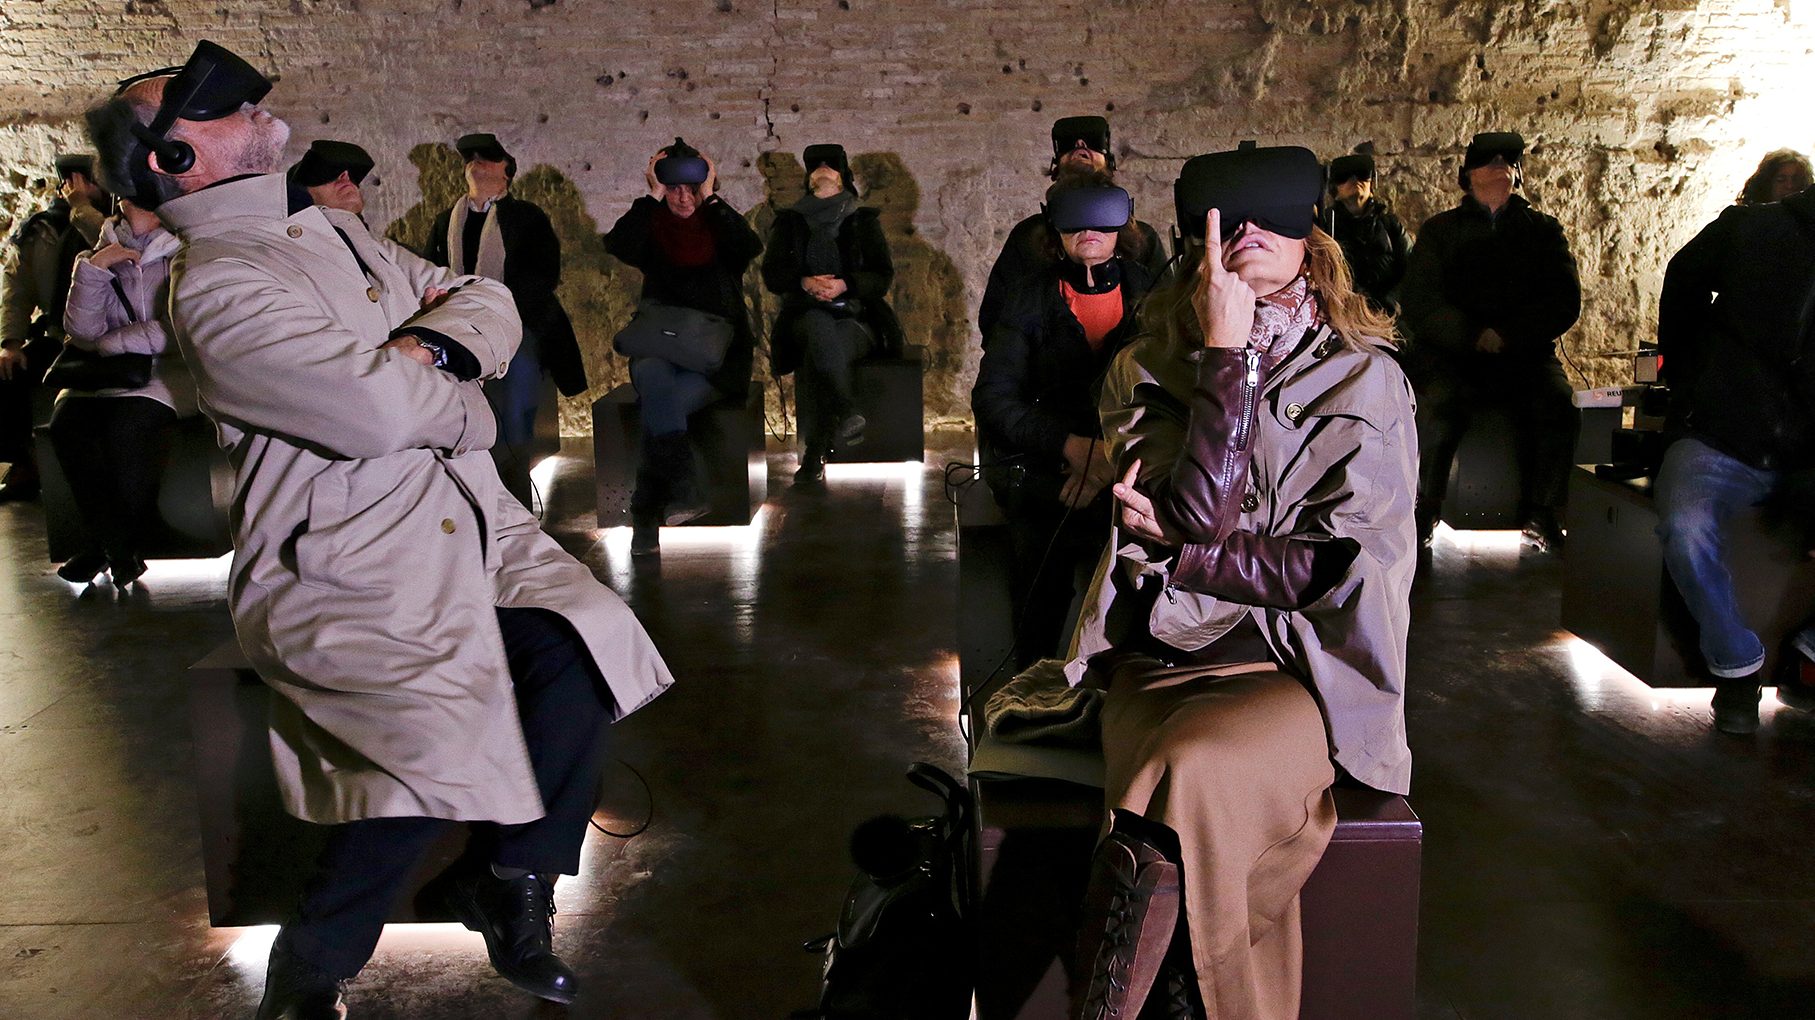 People wear virtual reality devices during a visit at the Domus Aurea, built by Roman Emperor Nero in 64 A.D. and later buried by Emperor Trajan in Rome, Italy on January 31, 2017. (Reuters/Max Rossi)